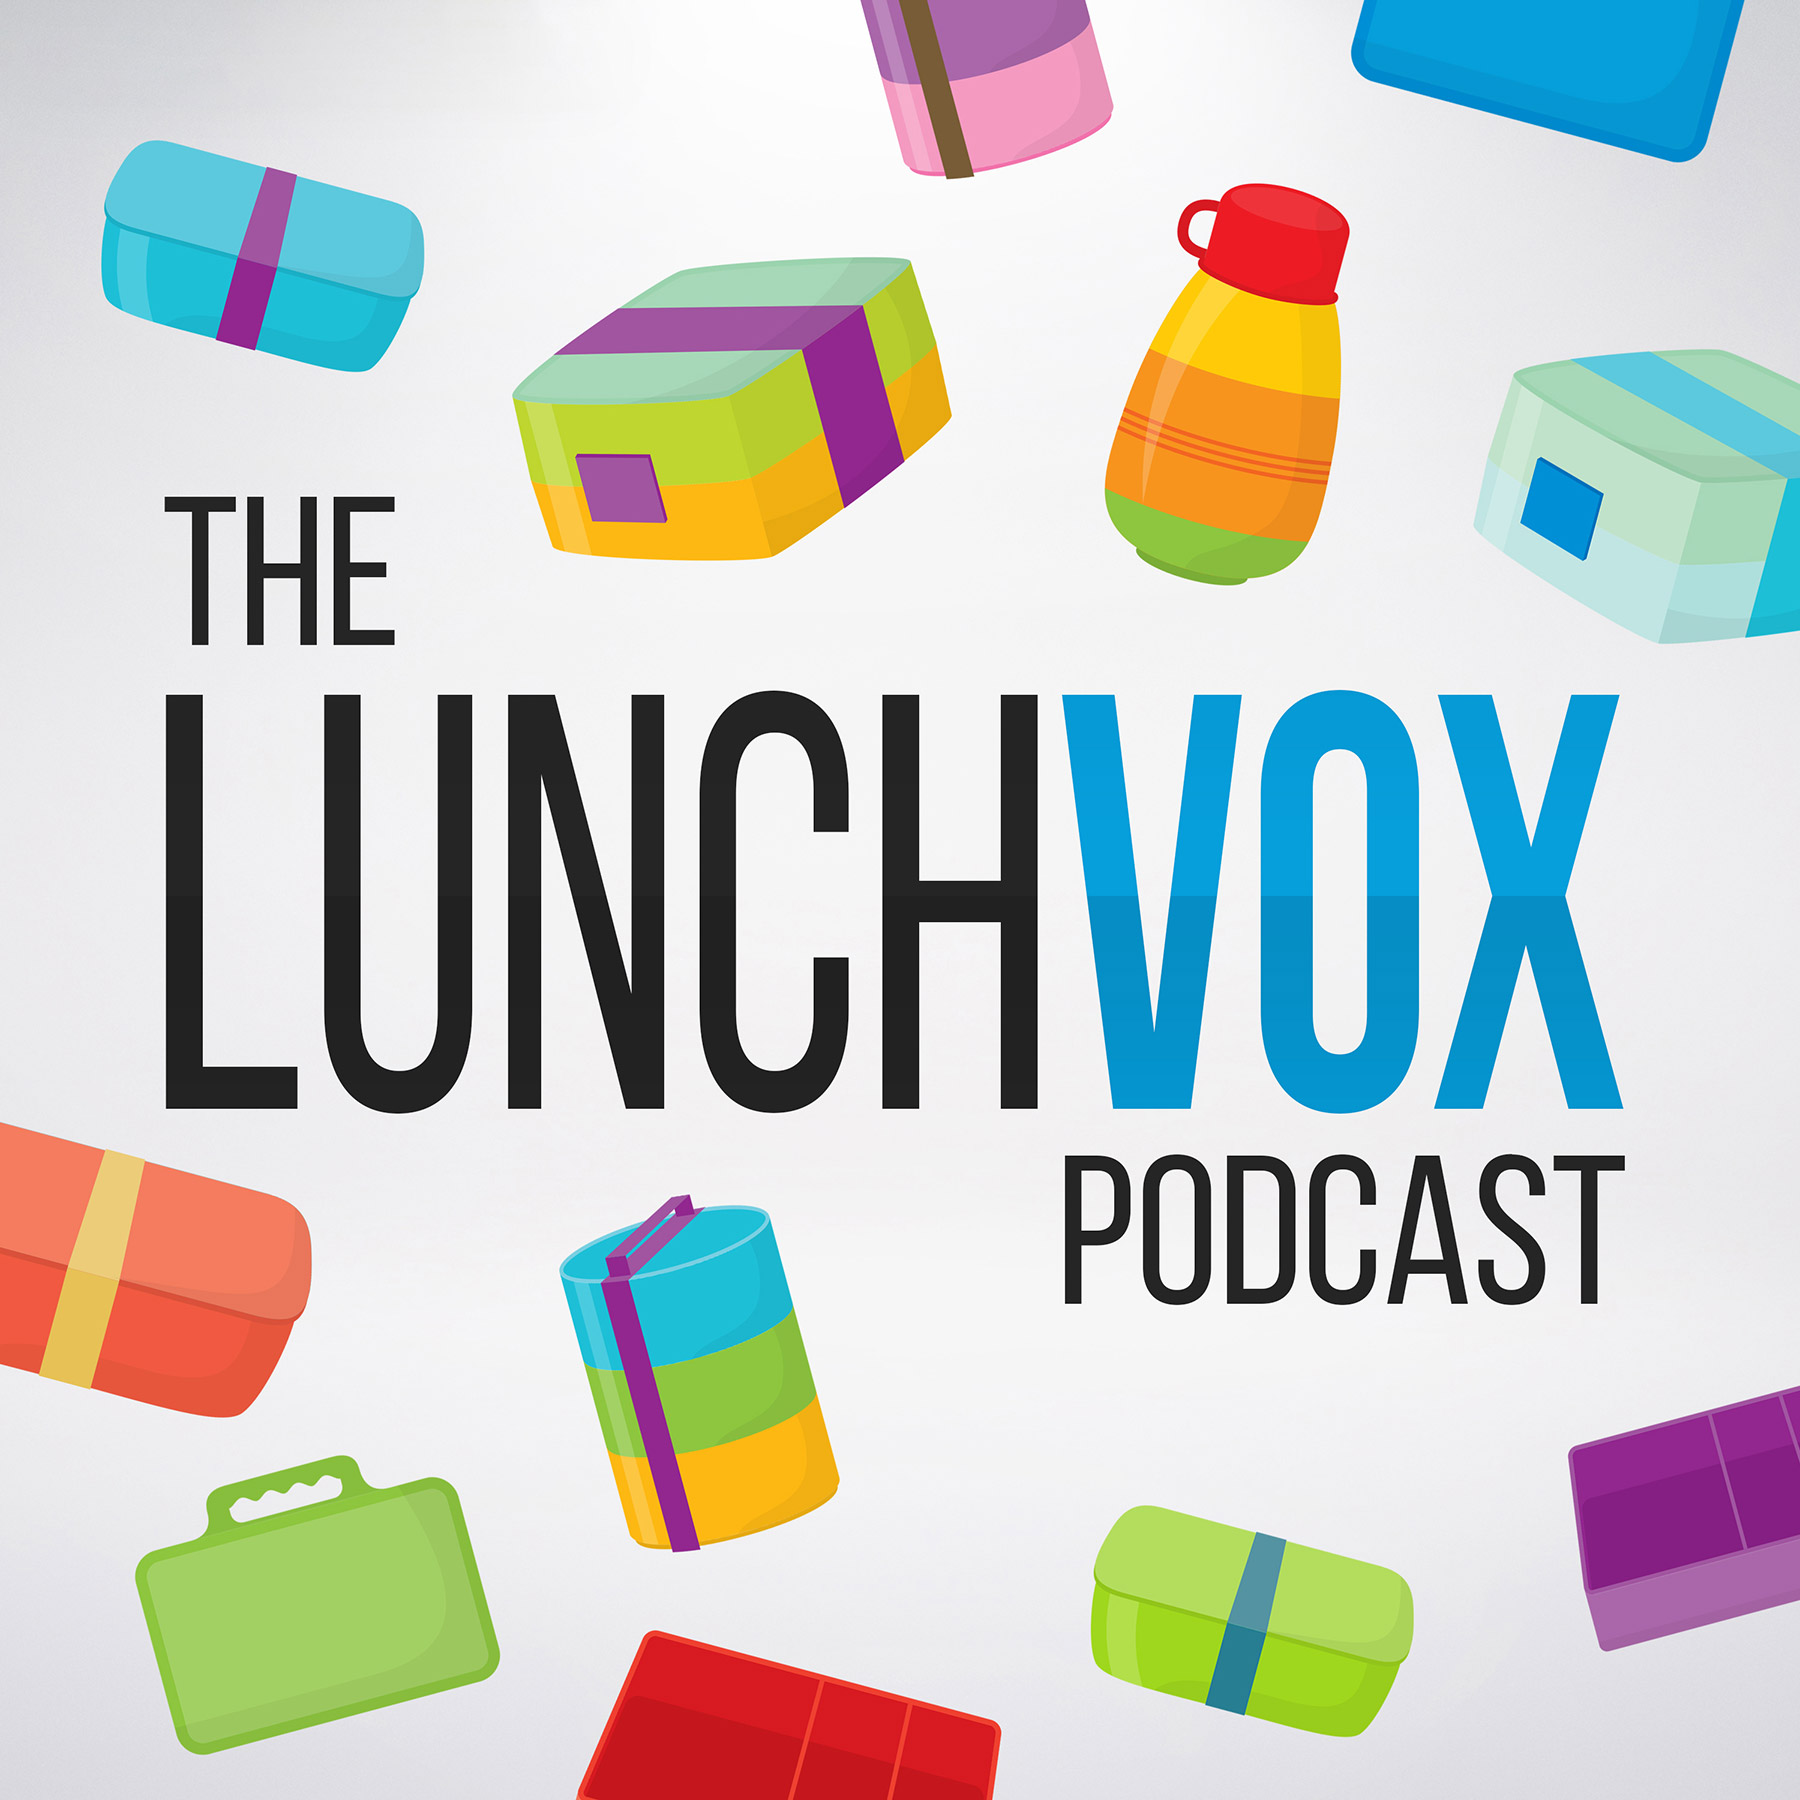 The Lunchvox Podcast